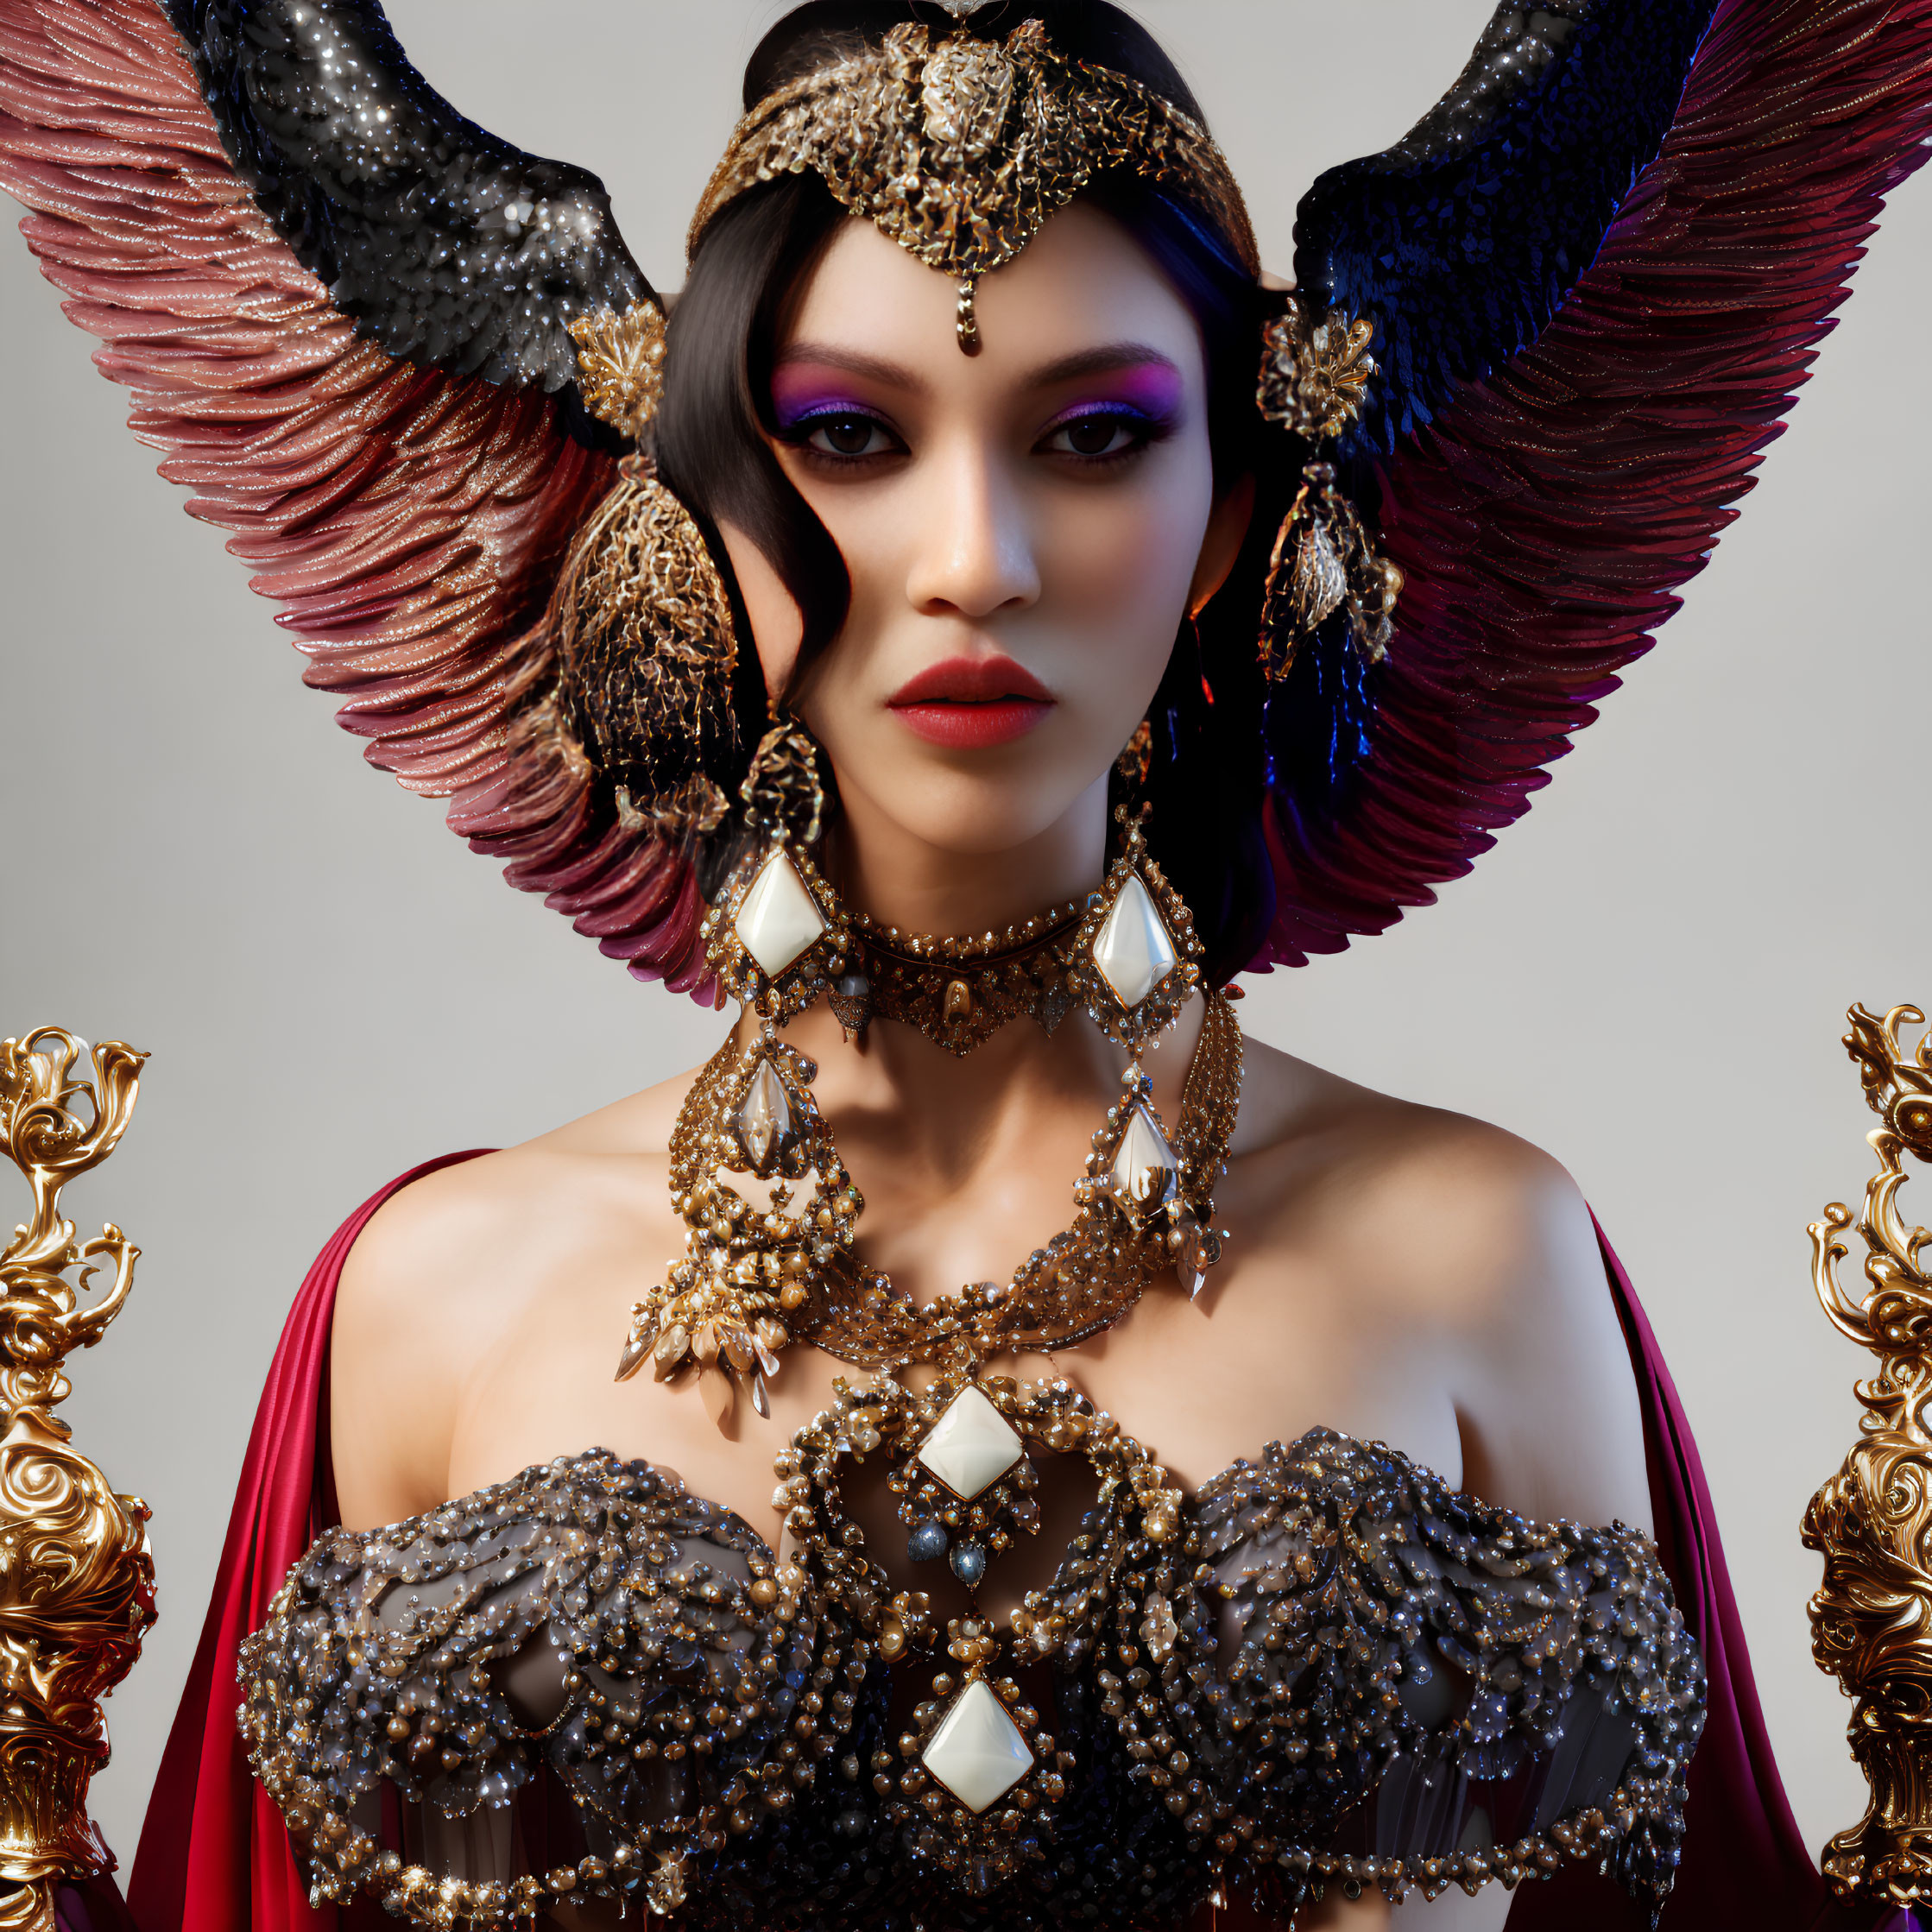 Regal woman with striking makeup in ornate jeweled outfit and feathered wings